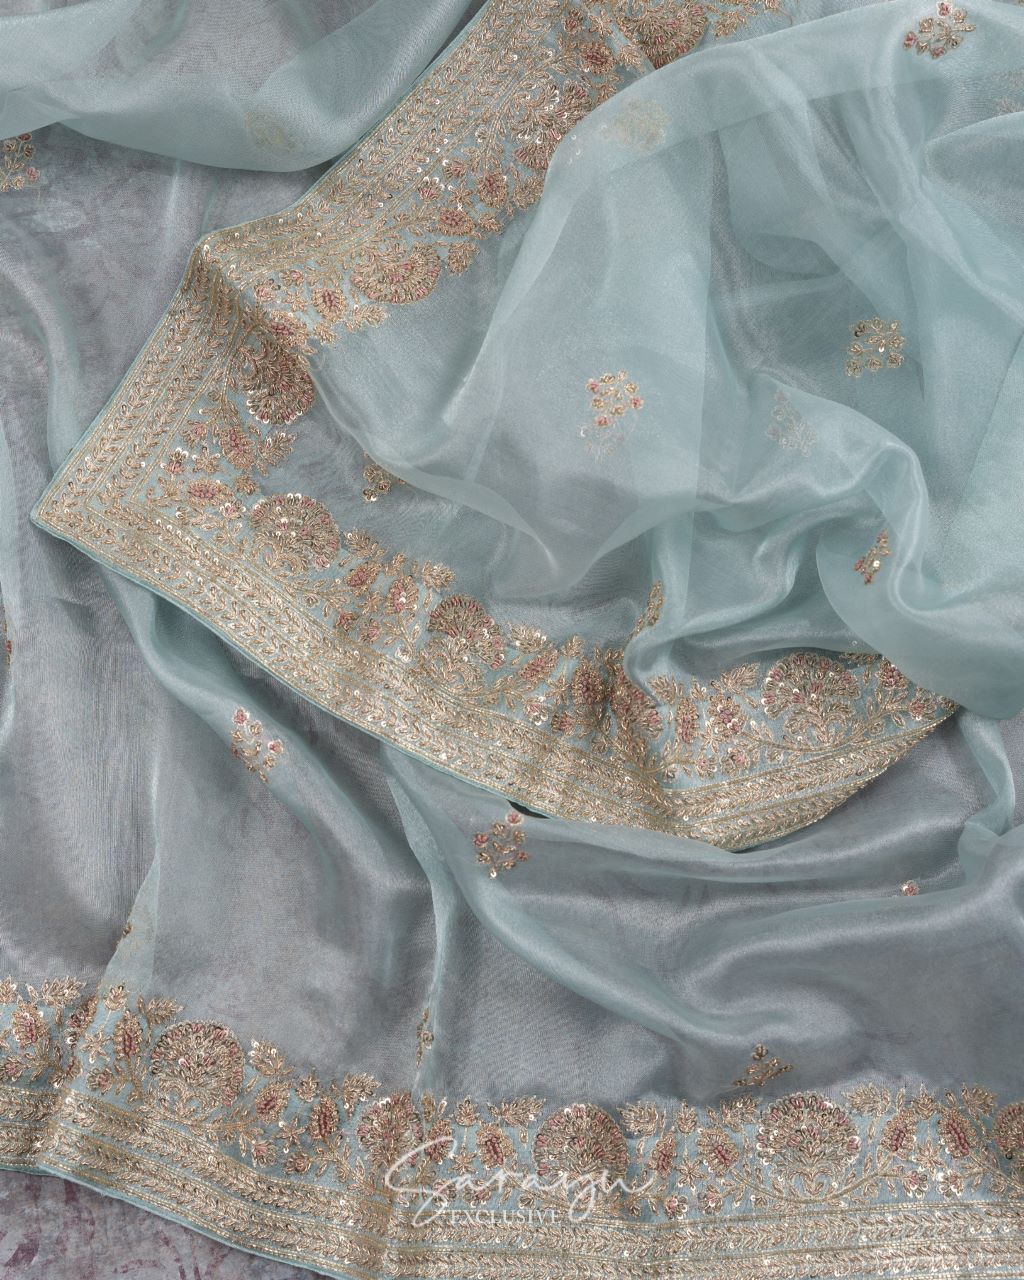 Sky blue Pure Organza with Handworked Borders Comes With Running Blouses with Handwork Design !!